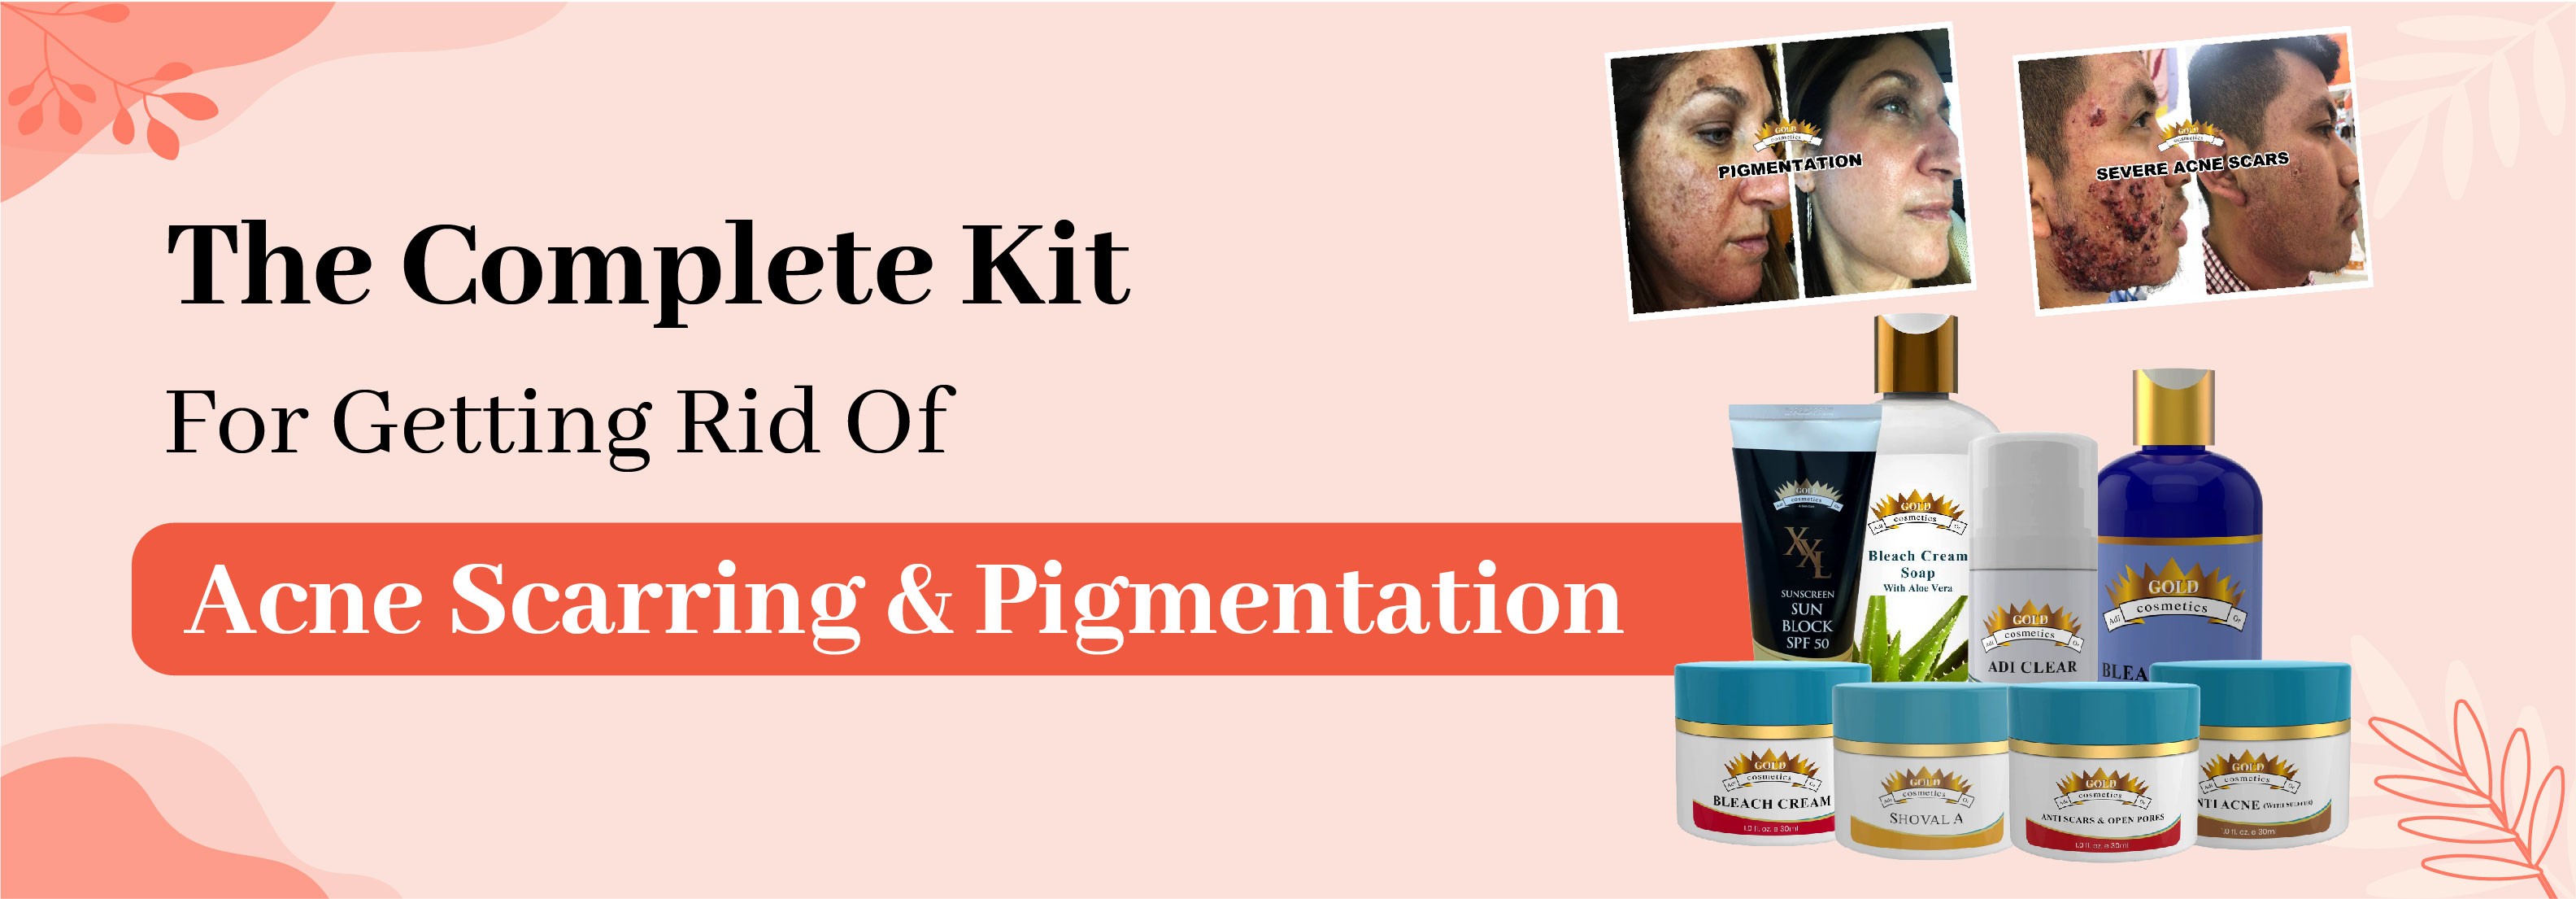 acne + pigmentation kit from gold cosmetics